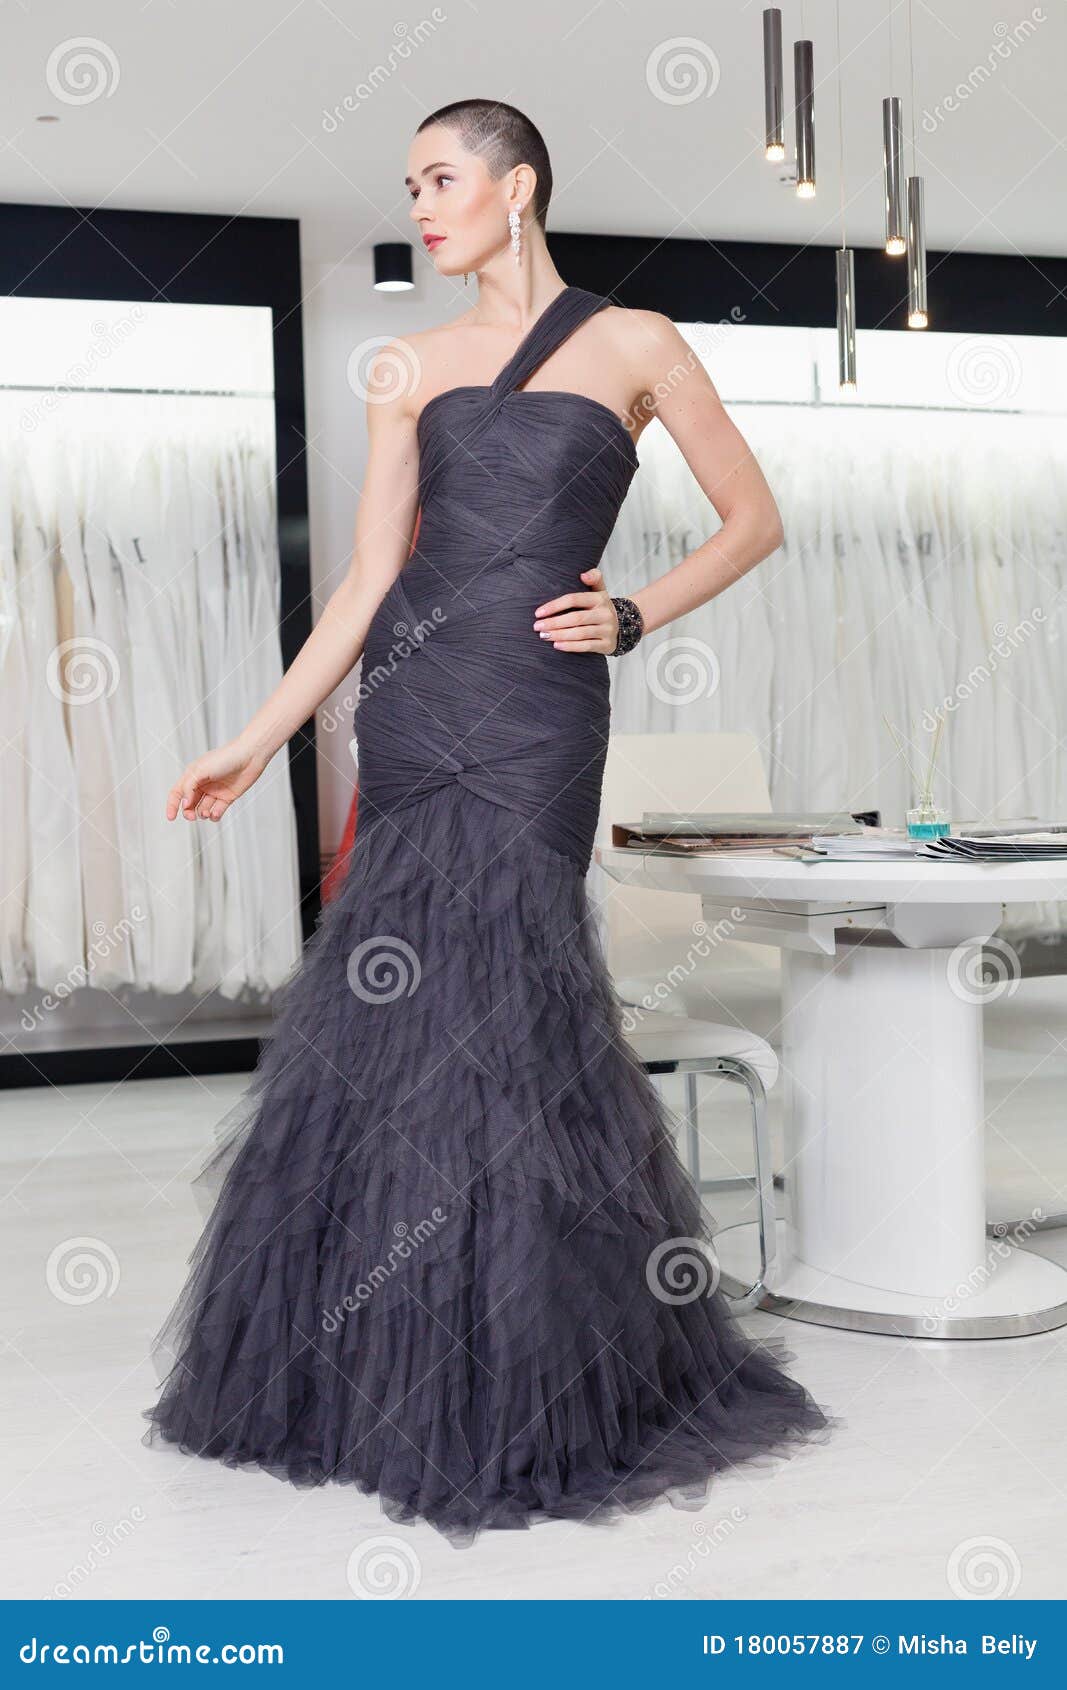 Exotic Woman with Short Hair, Beauty Style Portrait Stock Image - Image of  dress, full: 180057887